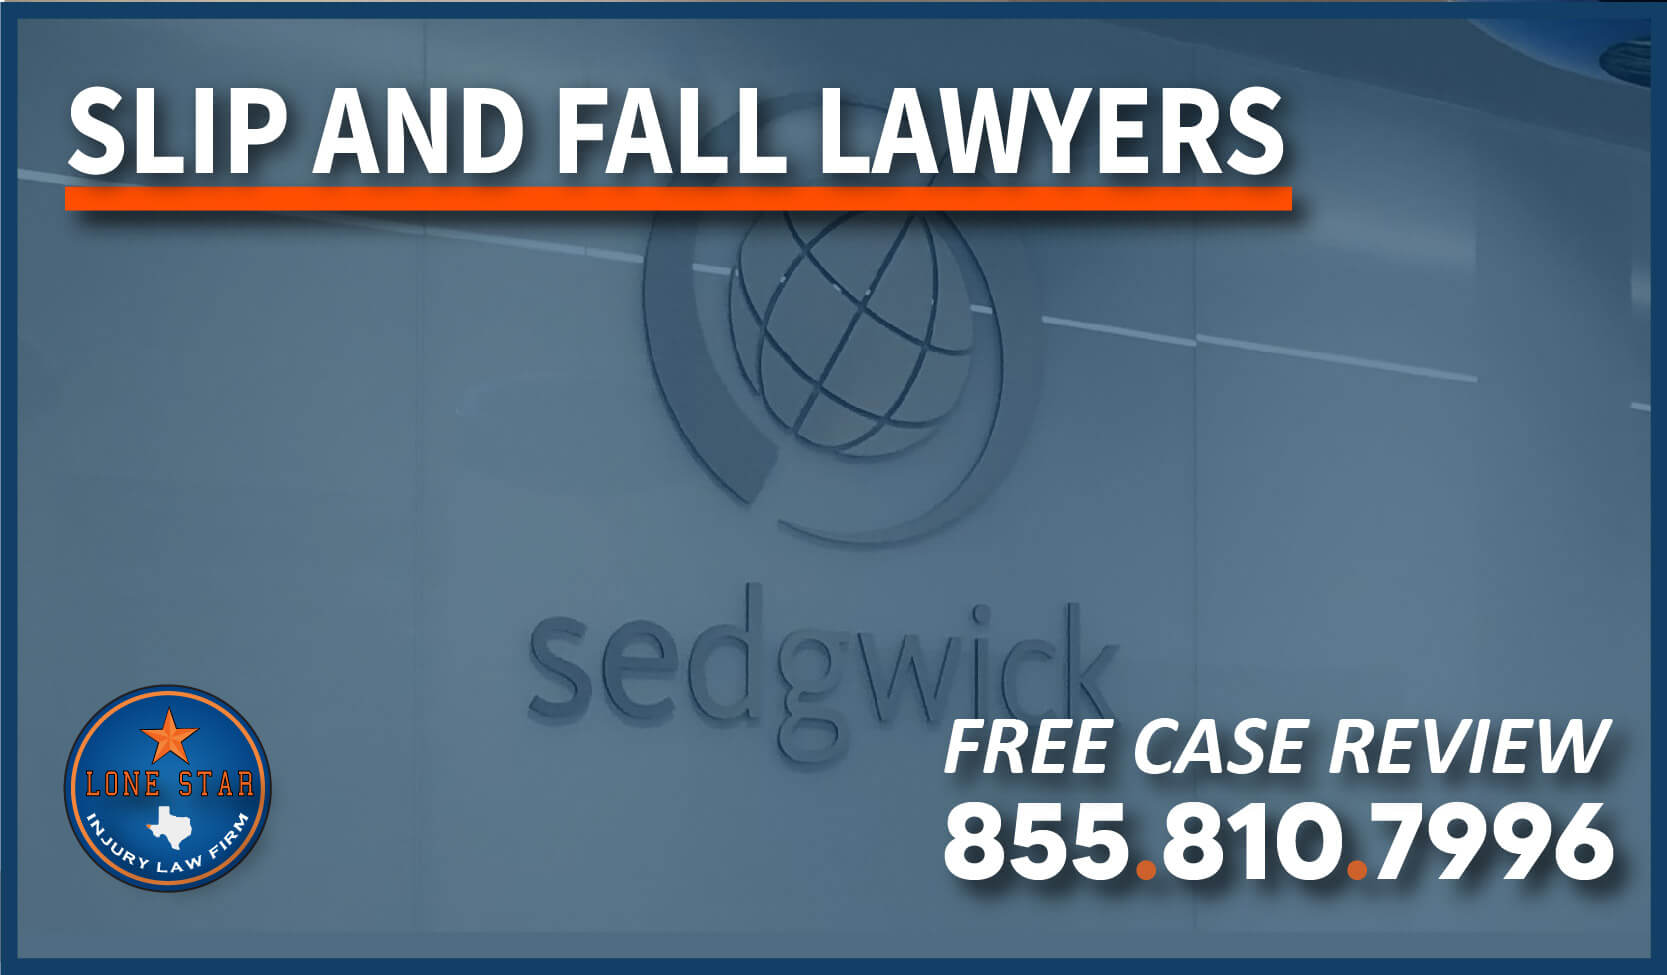 Sedgwick Insurance Slip and Fall Lawyers in Texas attorney liability property refuse claim compensation lawsuit sue